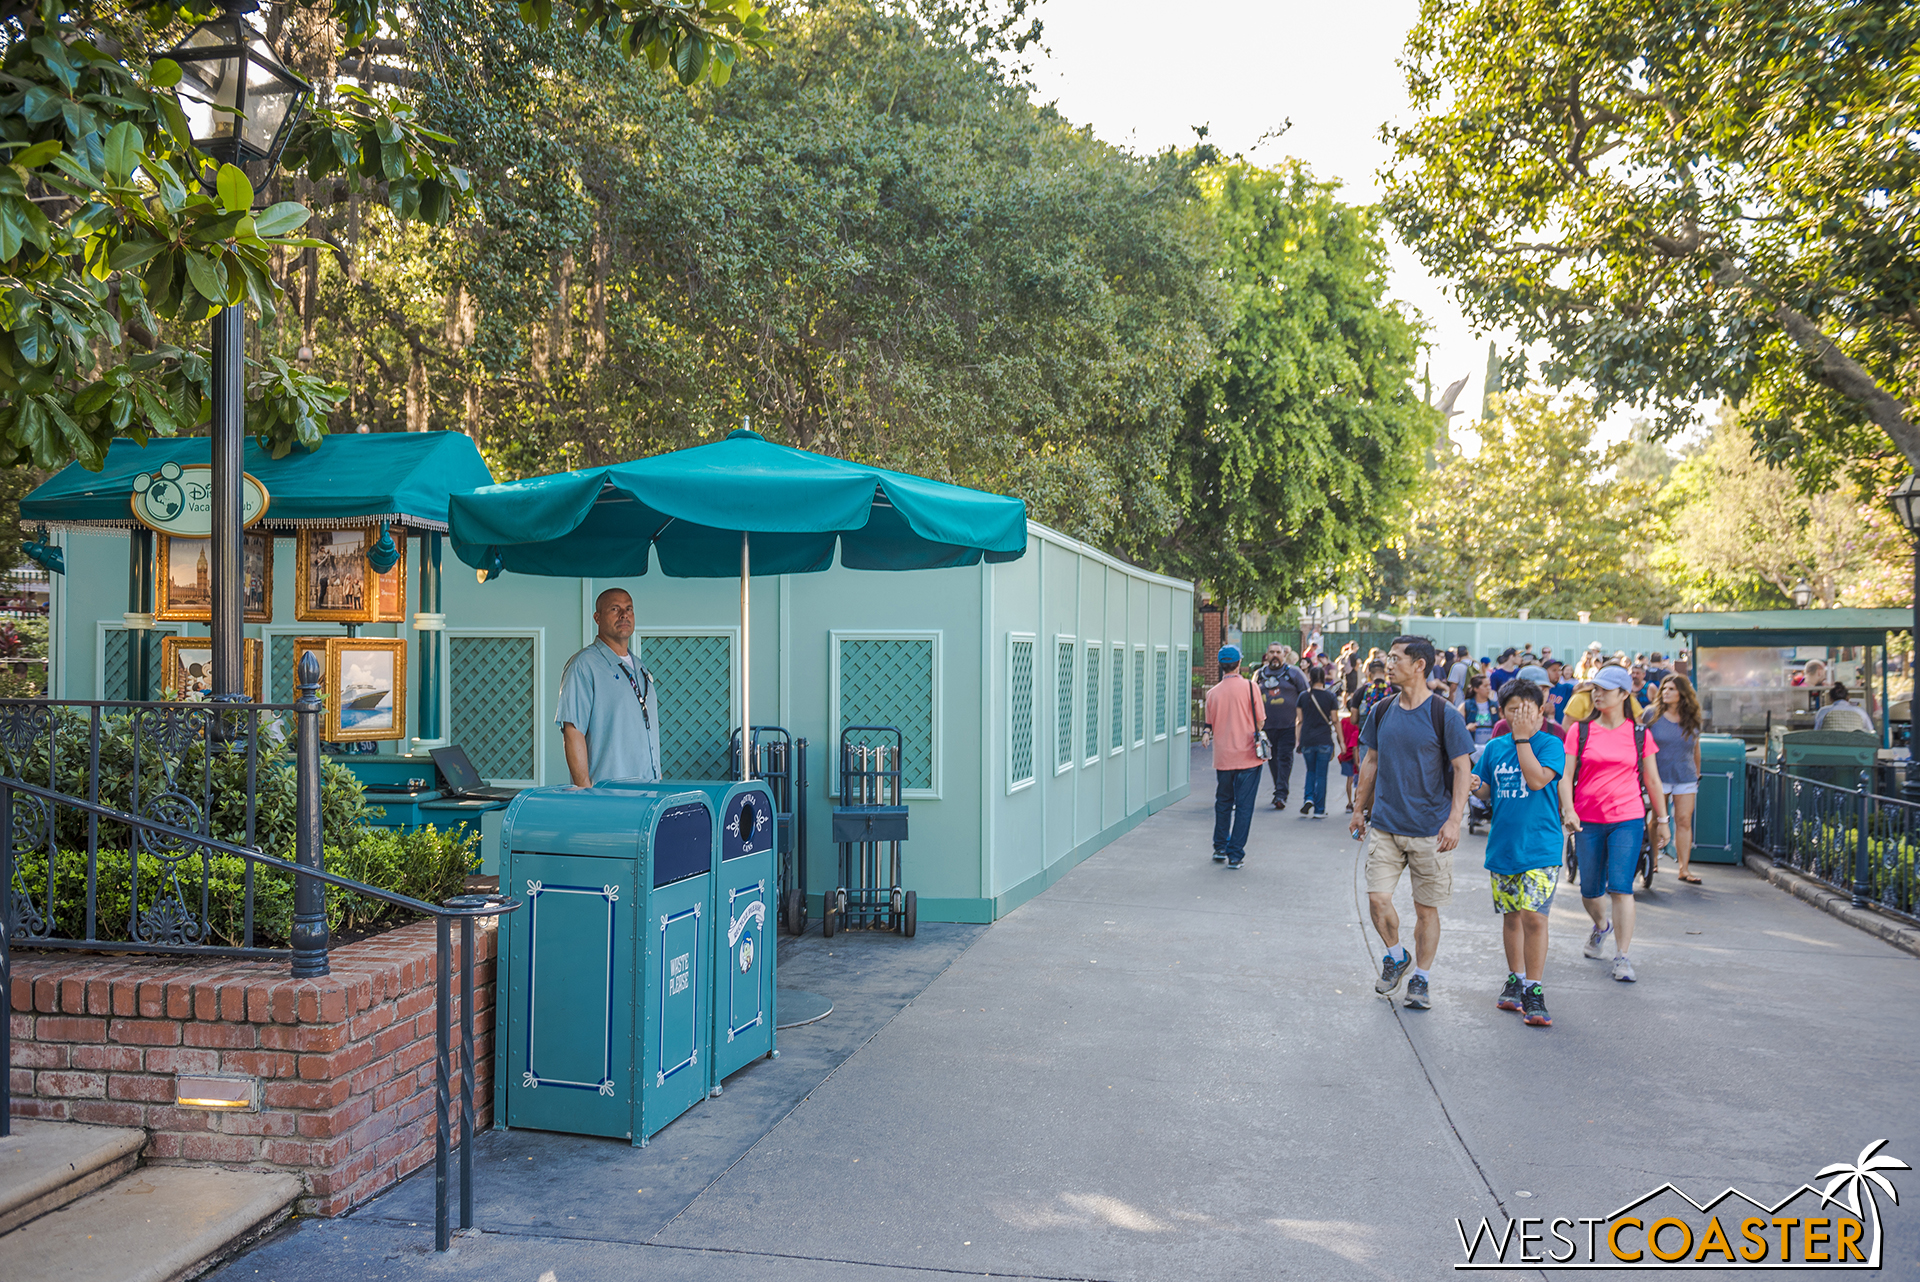  Planters under refurbishment in the foreground.  Haunted Mansion under refurbishment in the background. 